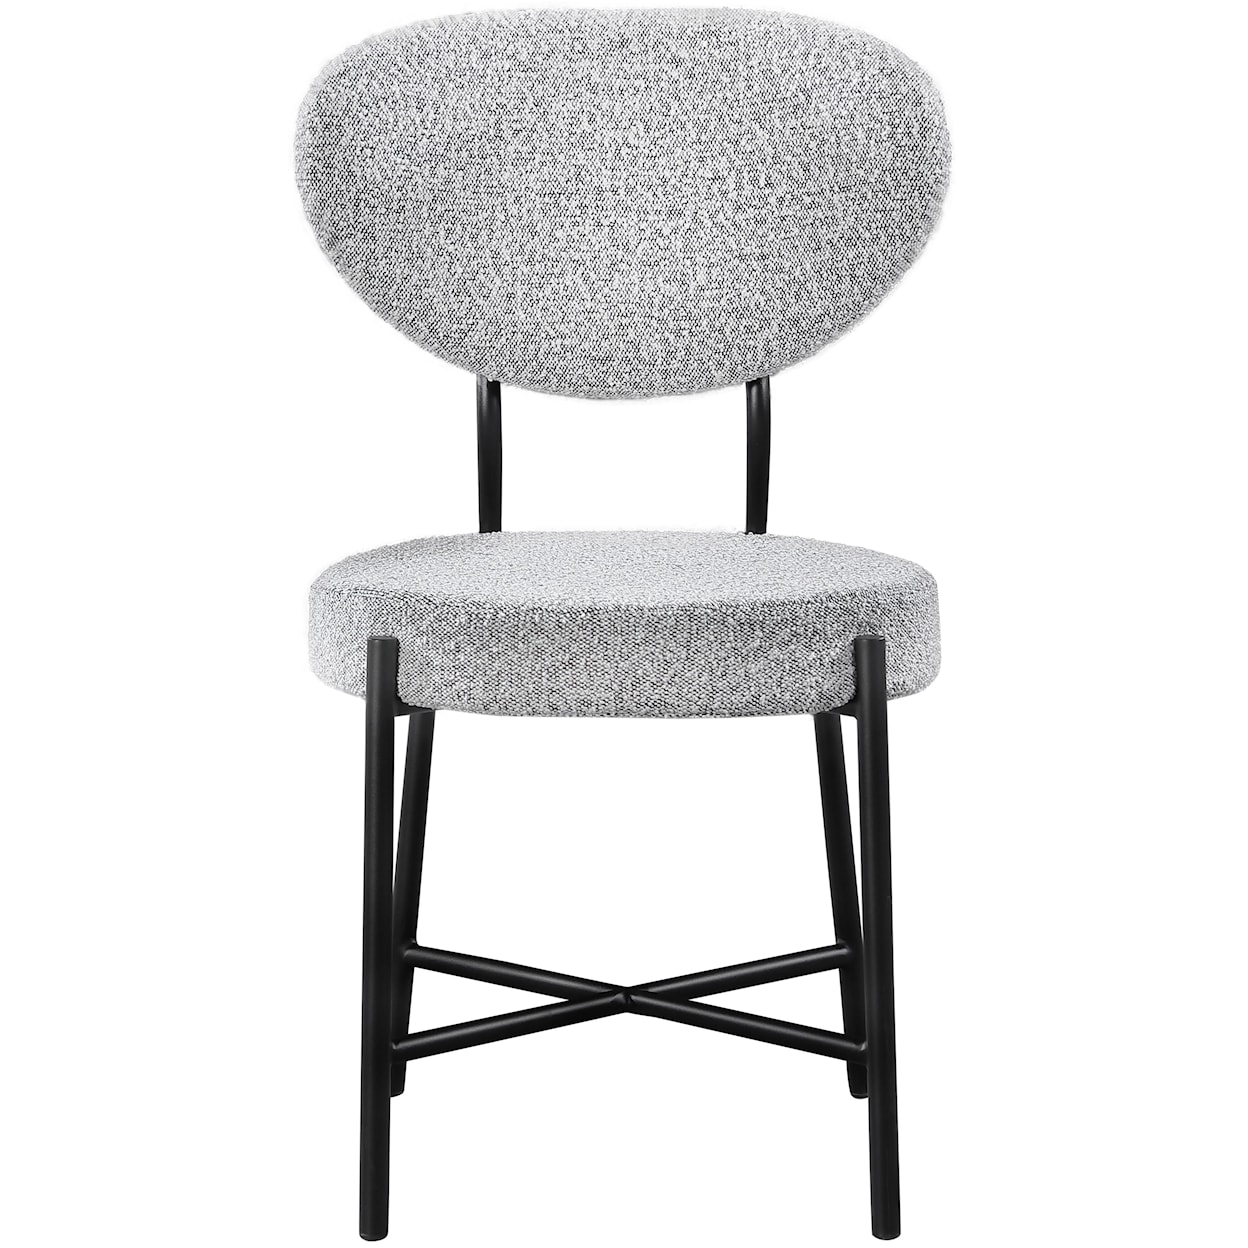 Meridian Furniture Allure Dining Chair